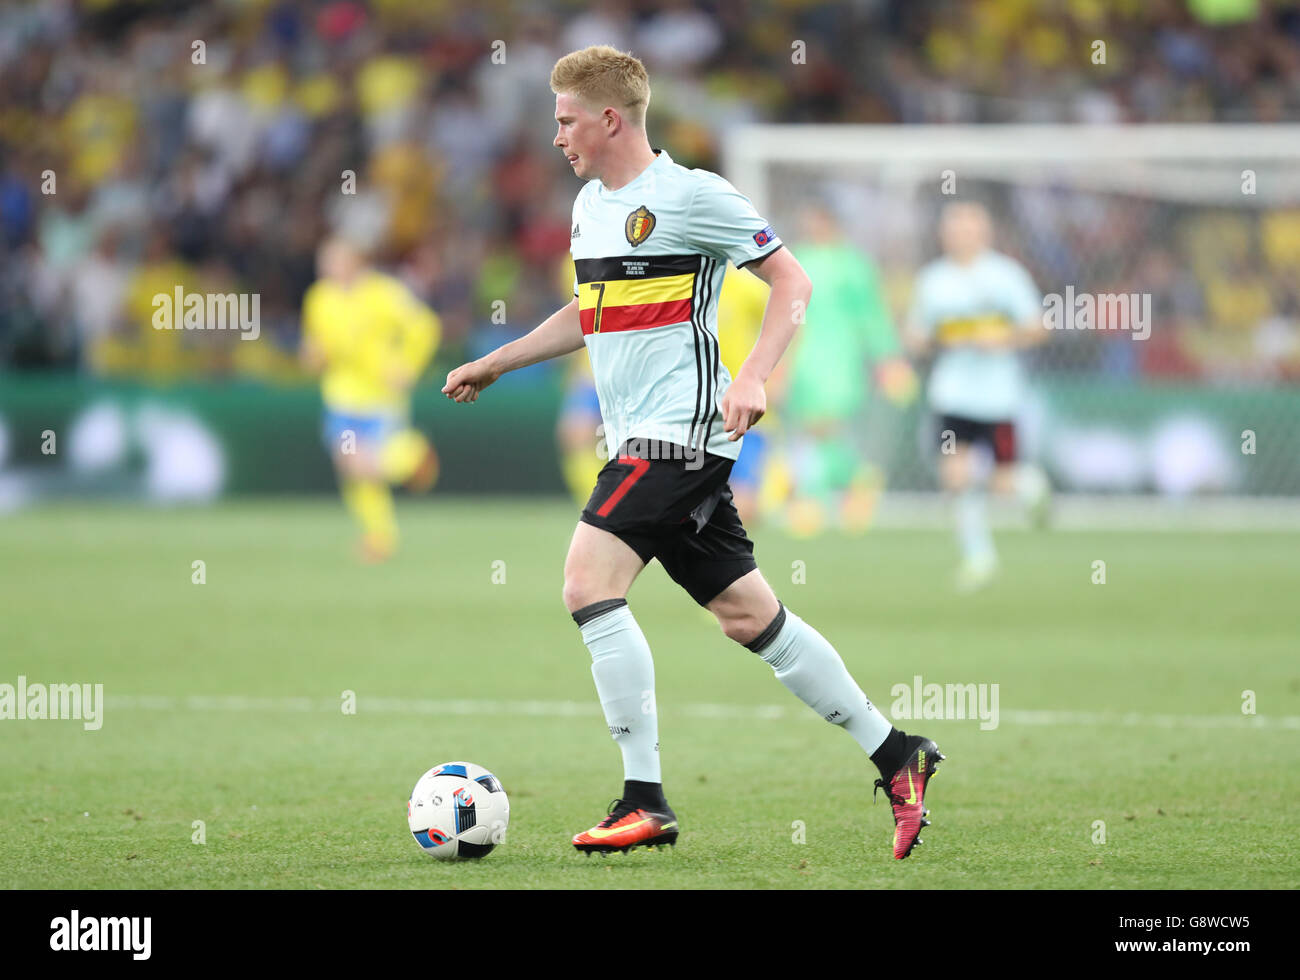 NICE, FRANCE - JUNE 22, 2016: Kevin De Bruyne of Belgium controls a ball during UEFA EURO 2016 game against Sweden at Allianz Riviera Stade de Nice, City of Nice, France. Belgium won 1-0 Stock Photo